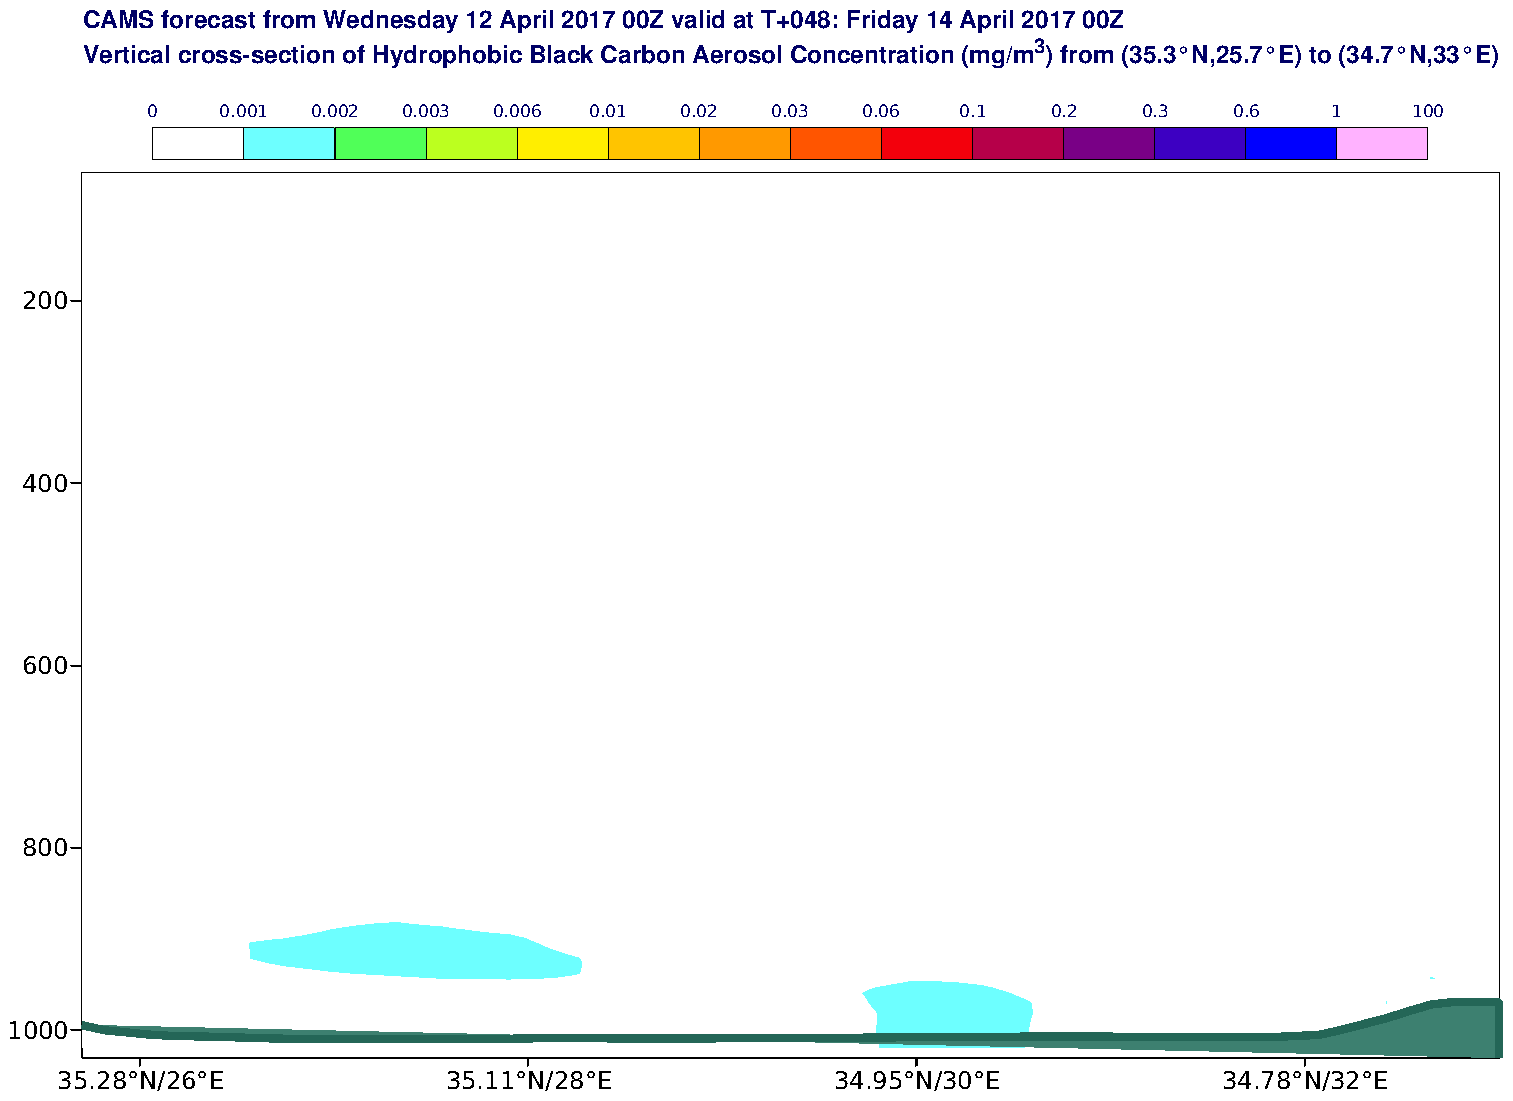 Vertical cross-section of Hydrophobic Black Carbon Aerosol Concentration (mg/m3) valid at T48 - 2017-04-14 00:00